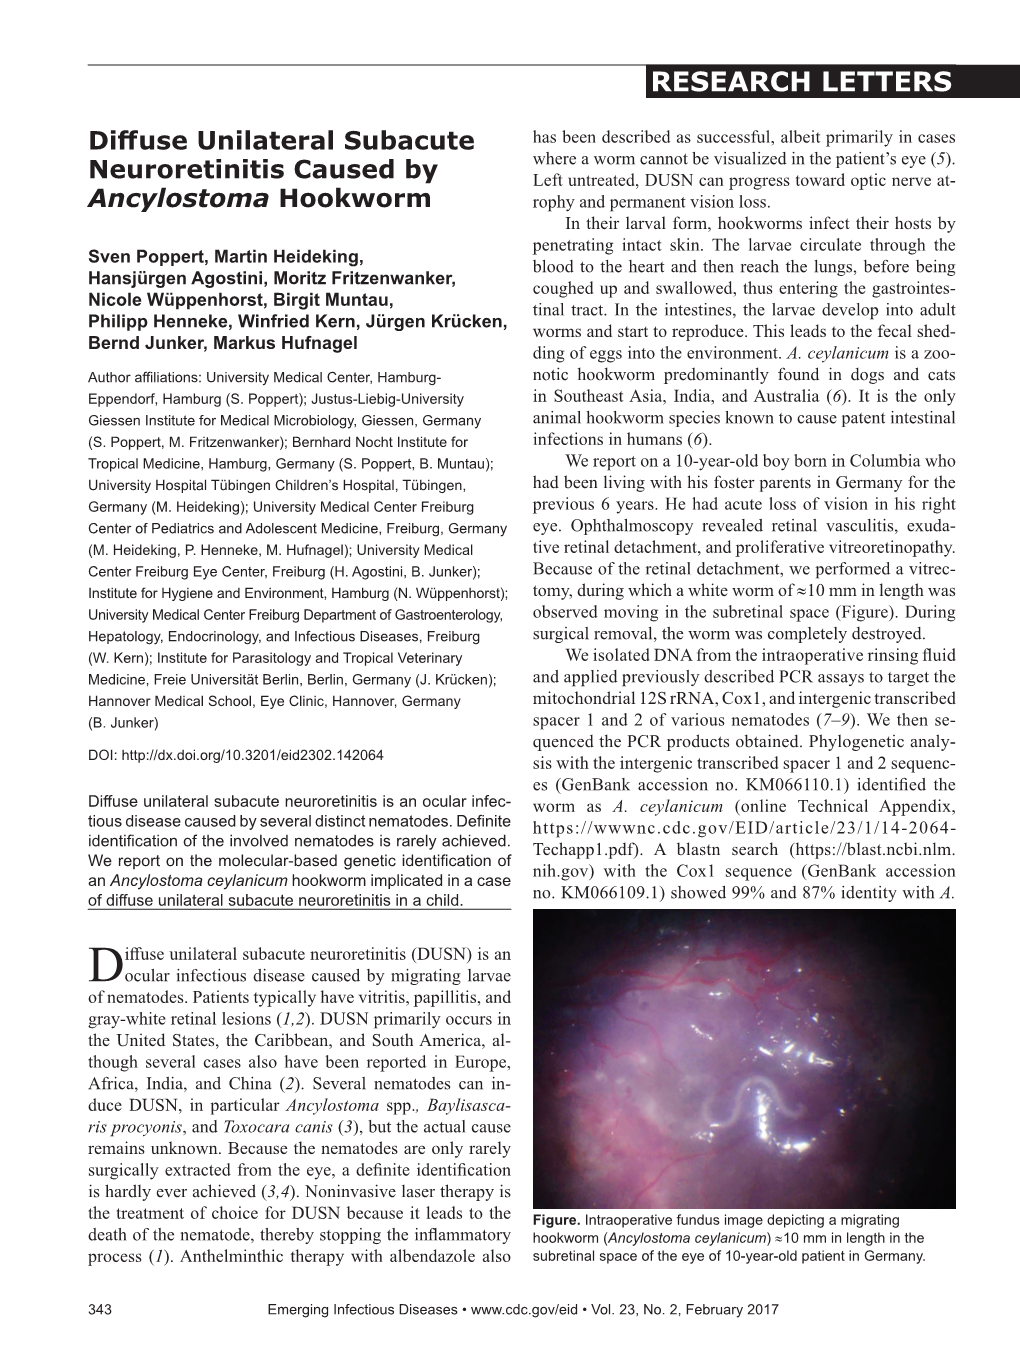 Diffuse Unilateral Subacute Neuroretinitis Caused by Ancylostoma Hookworm